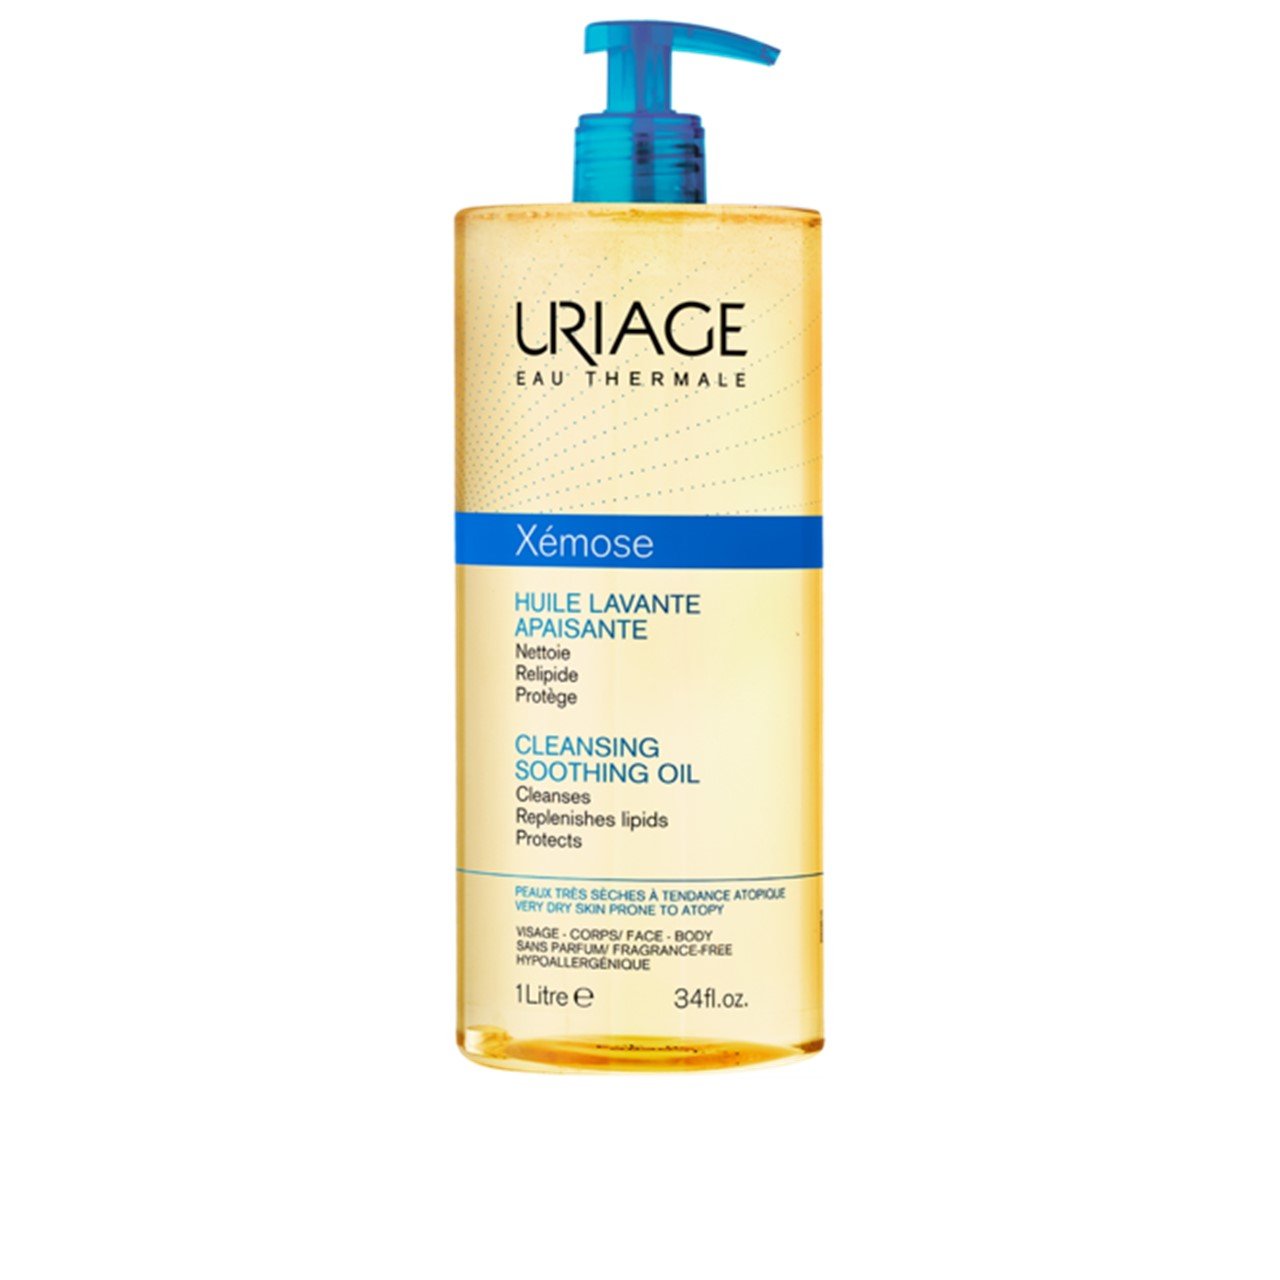 Uriage Xémose Cleansing Soothing Oil 1L